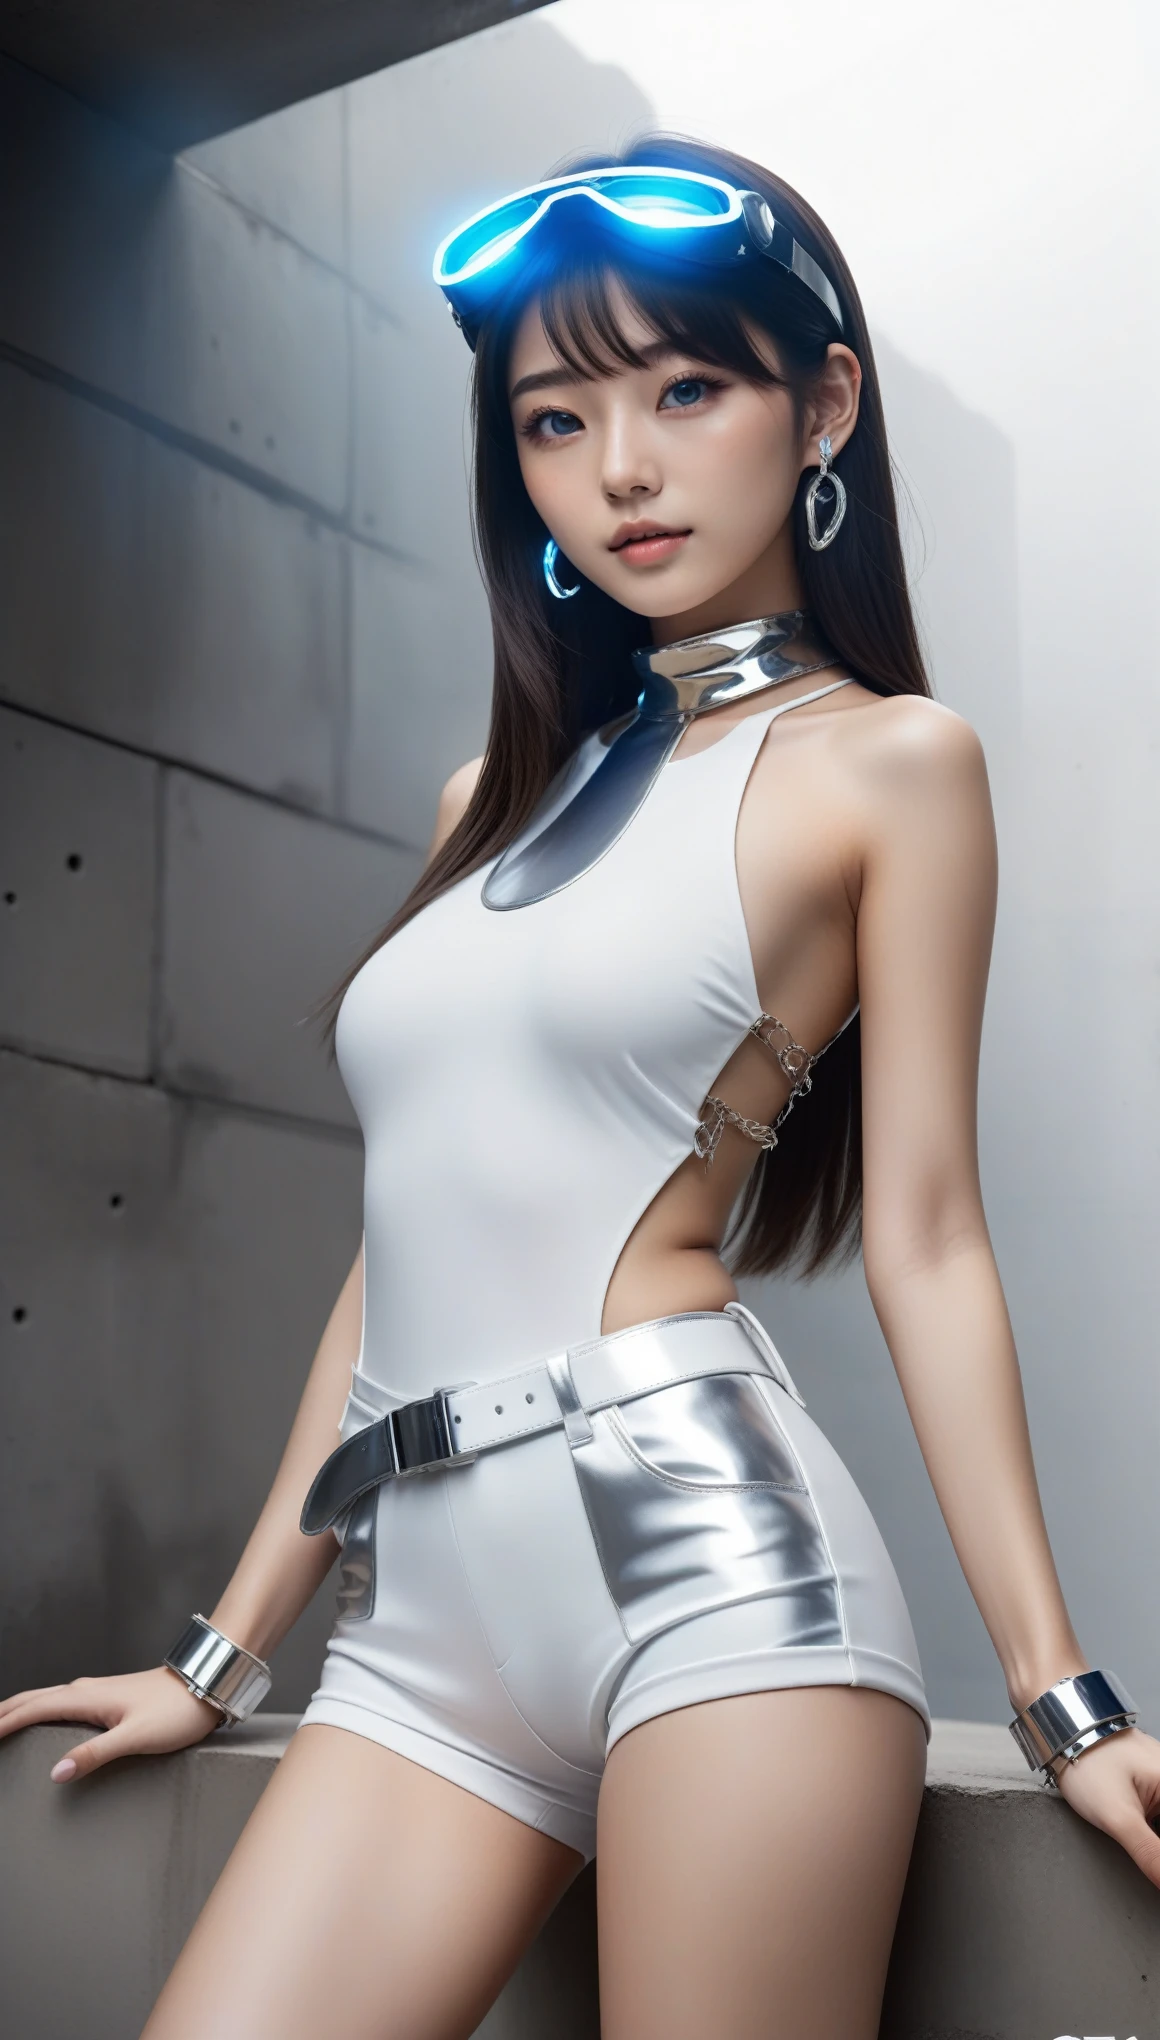 masterpiece, (Best Quality, perfect Detailed:1.4), Realistic, all body shot, 
BREAK 
beautiful Pretty and cute Japanese luna Girl, ig model, glamorous body, render of april, all body shot, standing,

BREAK 
(Detailed wear, all body wear:1.2),
(high-tech futuristic high-cut leg openings bodysuit:1.4), (layered over white short shorts:1.6), (silver metallic accessories:1.3), (chunky futuristic platform high-top sneakers:1.4), (silver visor sunglasses:1.3), (silver statement earrings:1.3), (stacked silver bracelets:1.2), (silver choker necklace:1.2), (futuristic silver belt with dangling charms:1.3),(glowing LED accents:1.3), (white theme:1.3),

BREAK 
(Detailed medium breasts, Detailed bodyline, Detailed legs and calves), (ultra slim waist, medium breasts, medium buttocks, beautiful sexy legs:1.2), White and beautiful Silky skin, arranged gray hair, small head,

BREAK small head, Detailed face, cute and Pretty slim face, Duck mouth, perfect beautiful Tooth, blue eyes, half open eyes, shiny eyes, looking viewer, 
in a concrete, fog, mist, steem